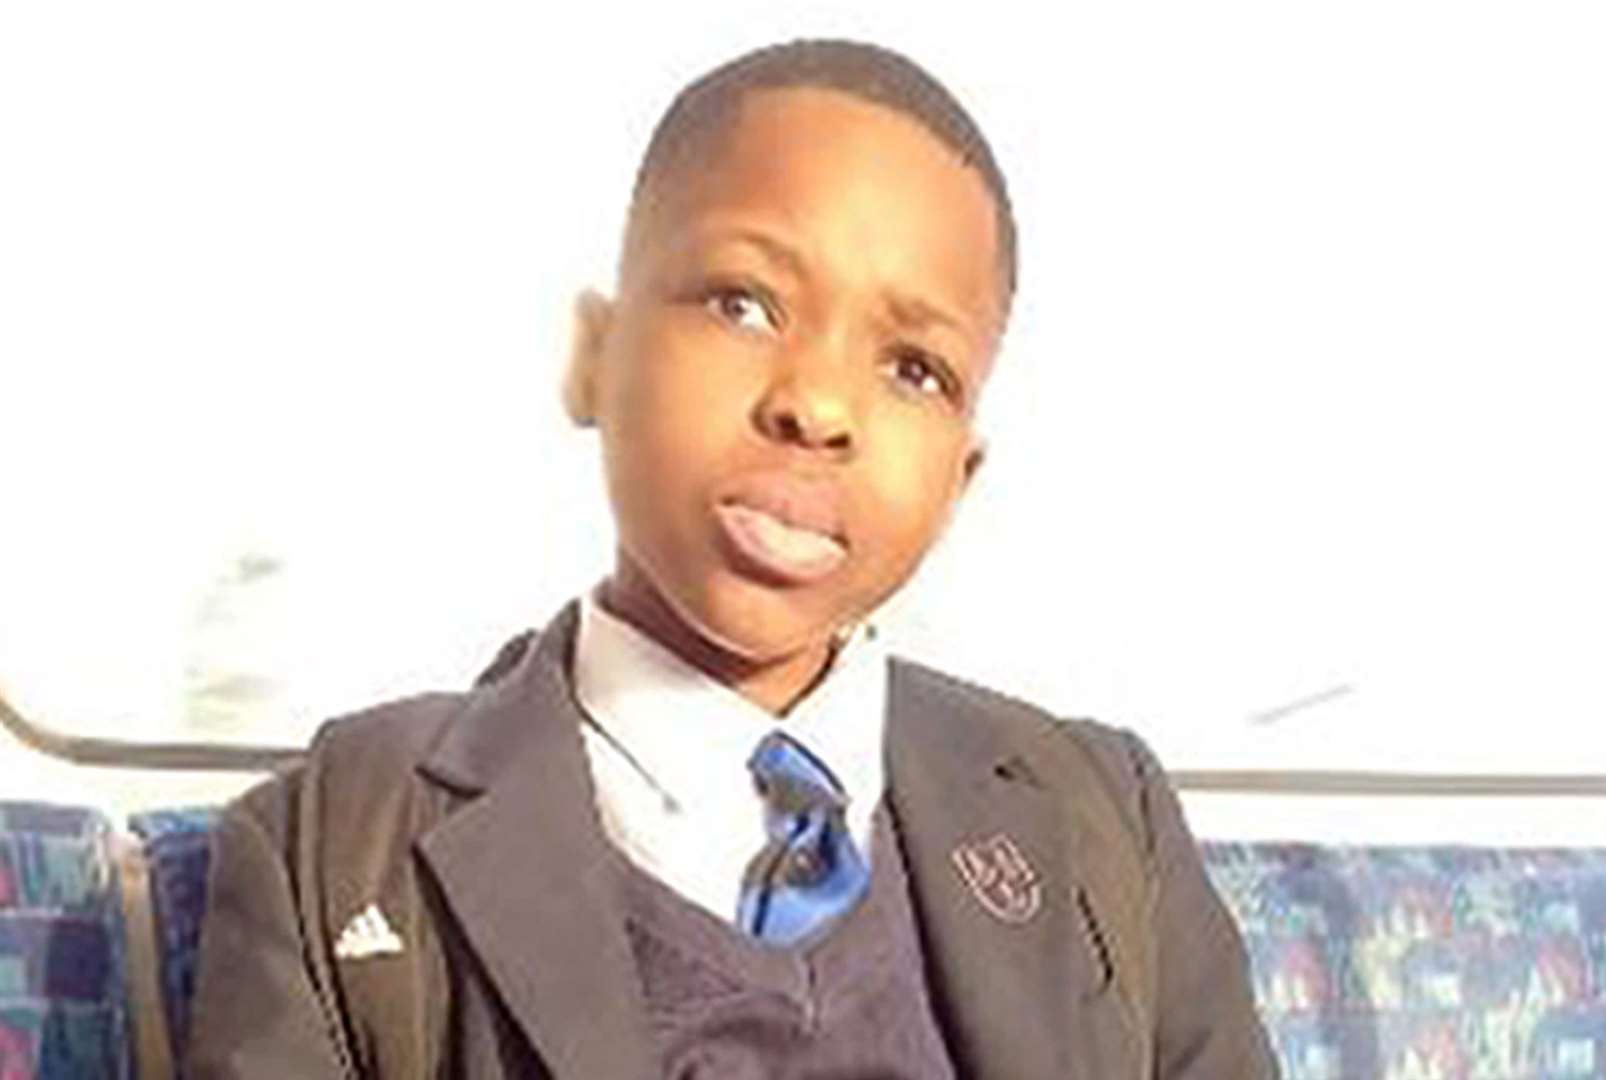 Daniel Anjorin, the 14-year-old boy who died in Hainault, east London on Tuesday. (Metropolitan Police/PA)